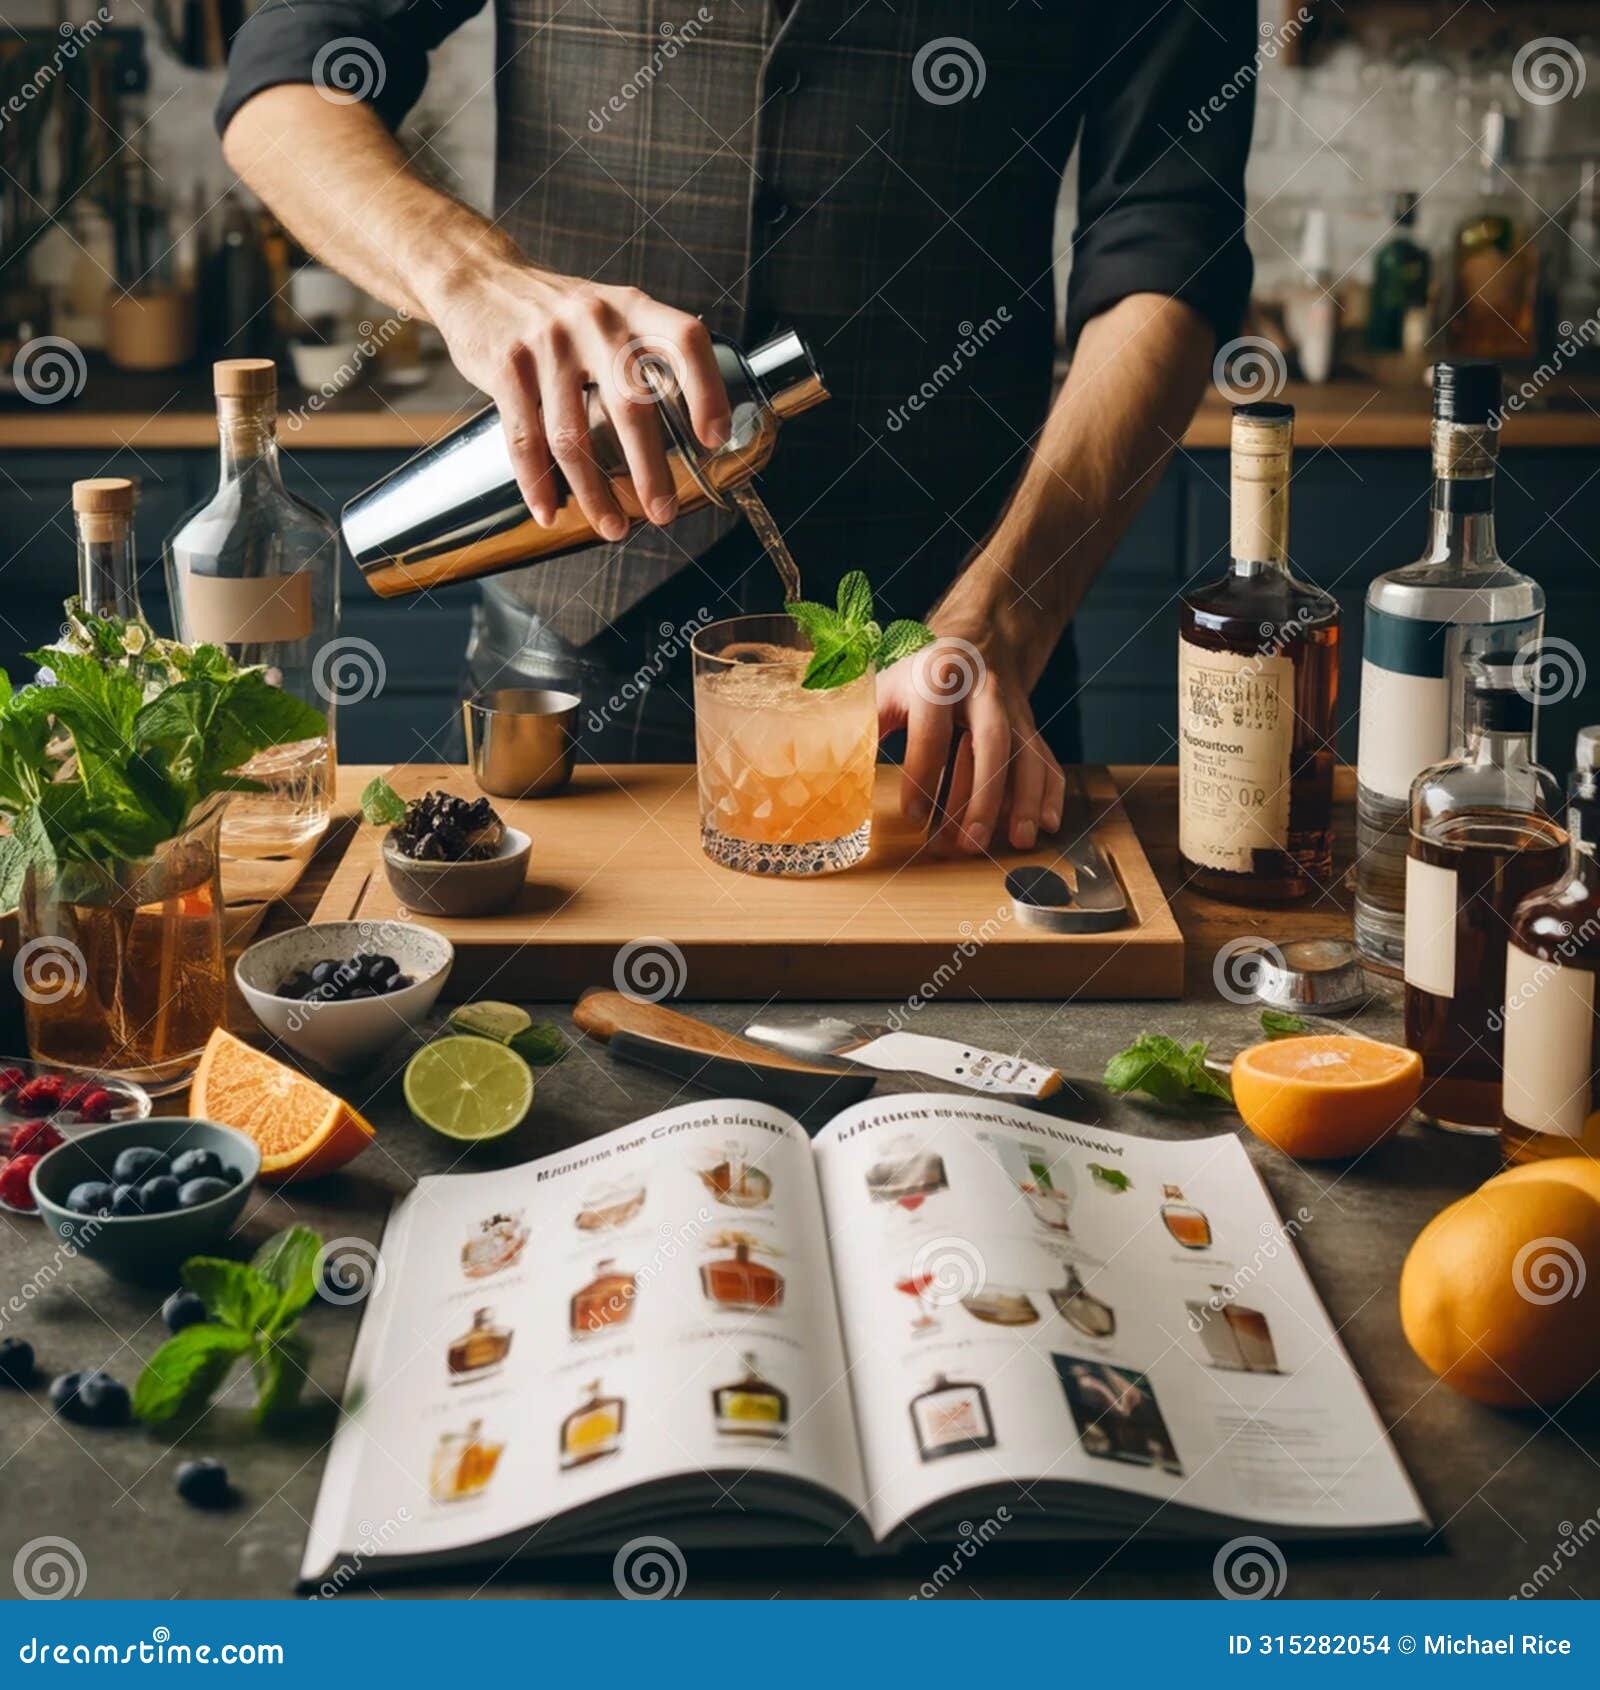 mixology mastery: hands crafting cocktails with recipe book and fresh ingredients